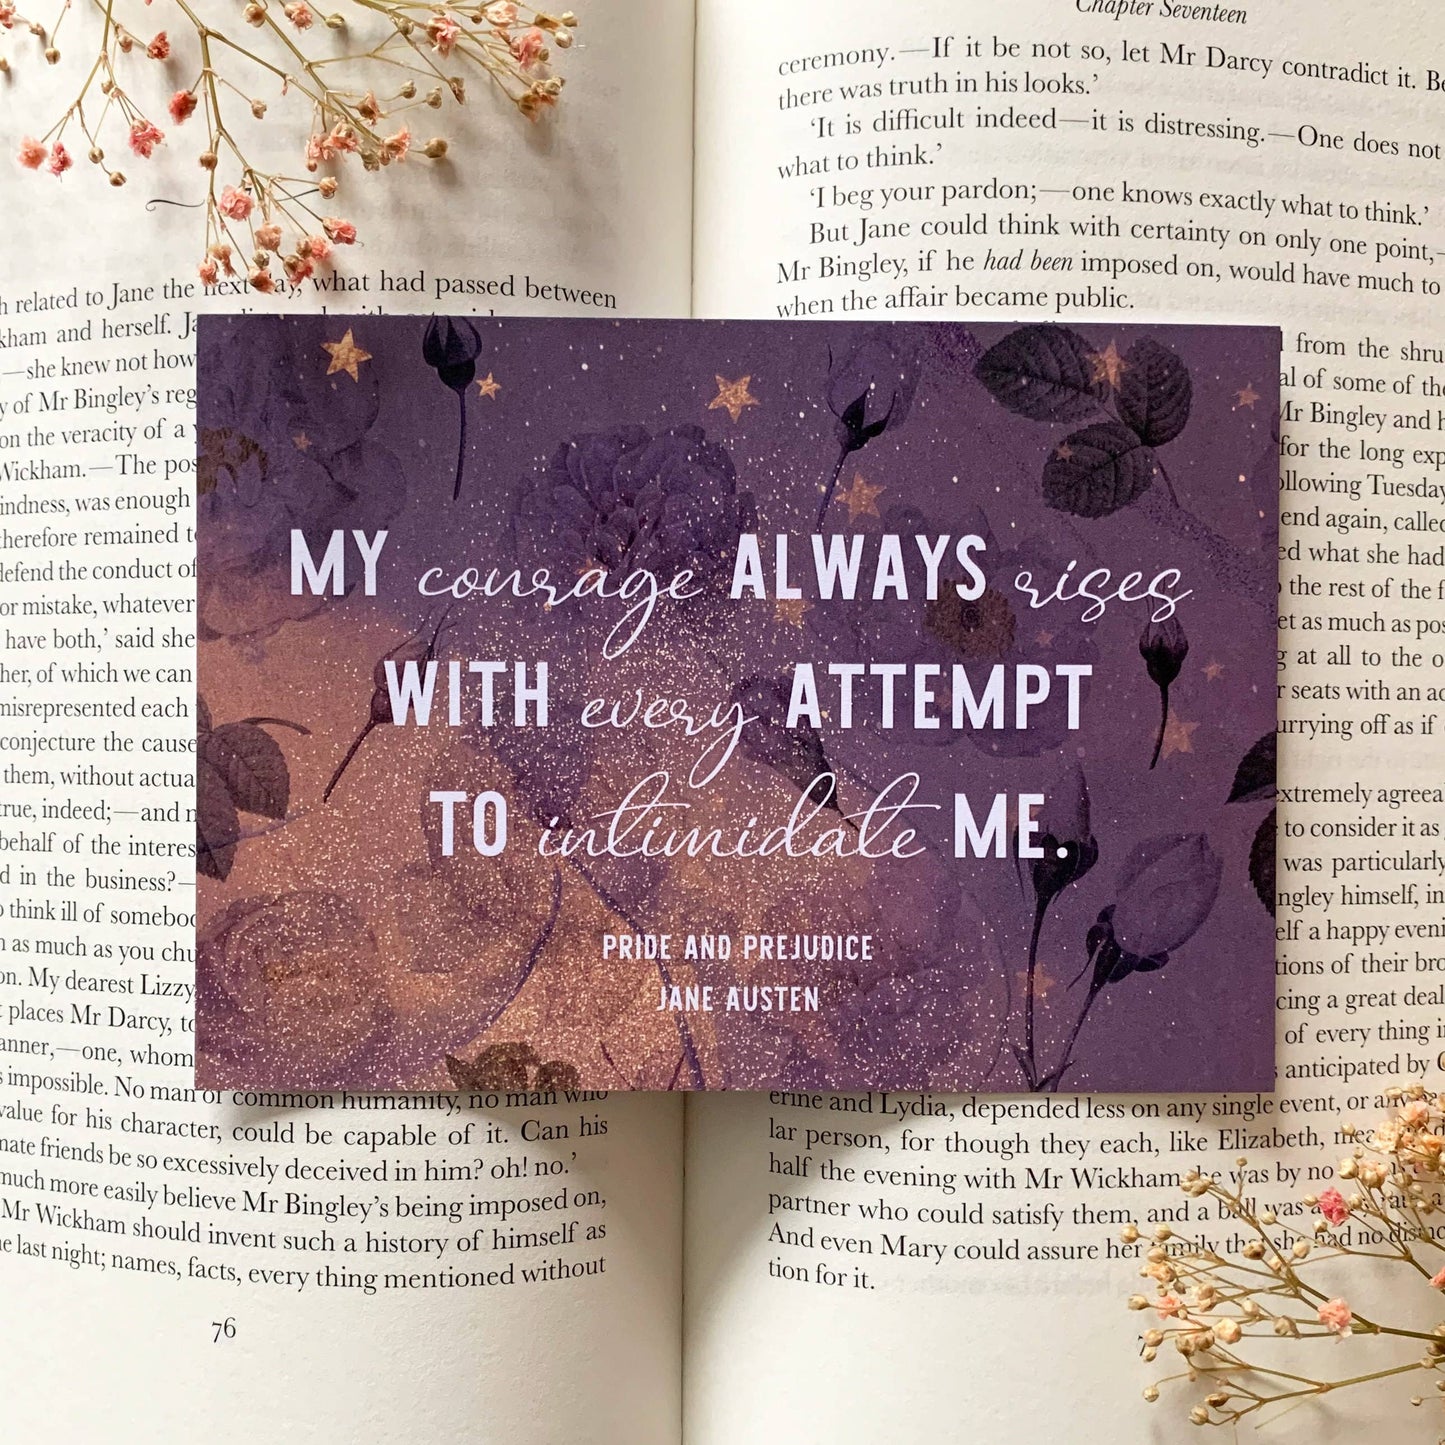 Inspiring Quotes By Classic Women Writers Postcard Set